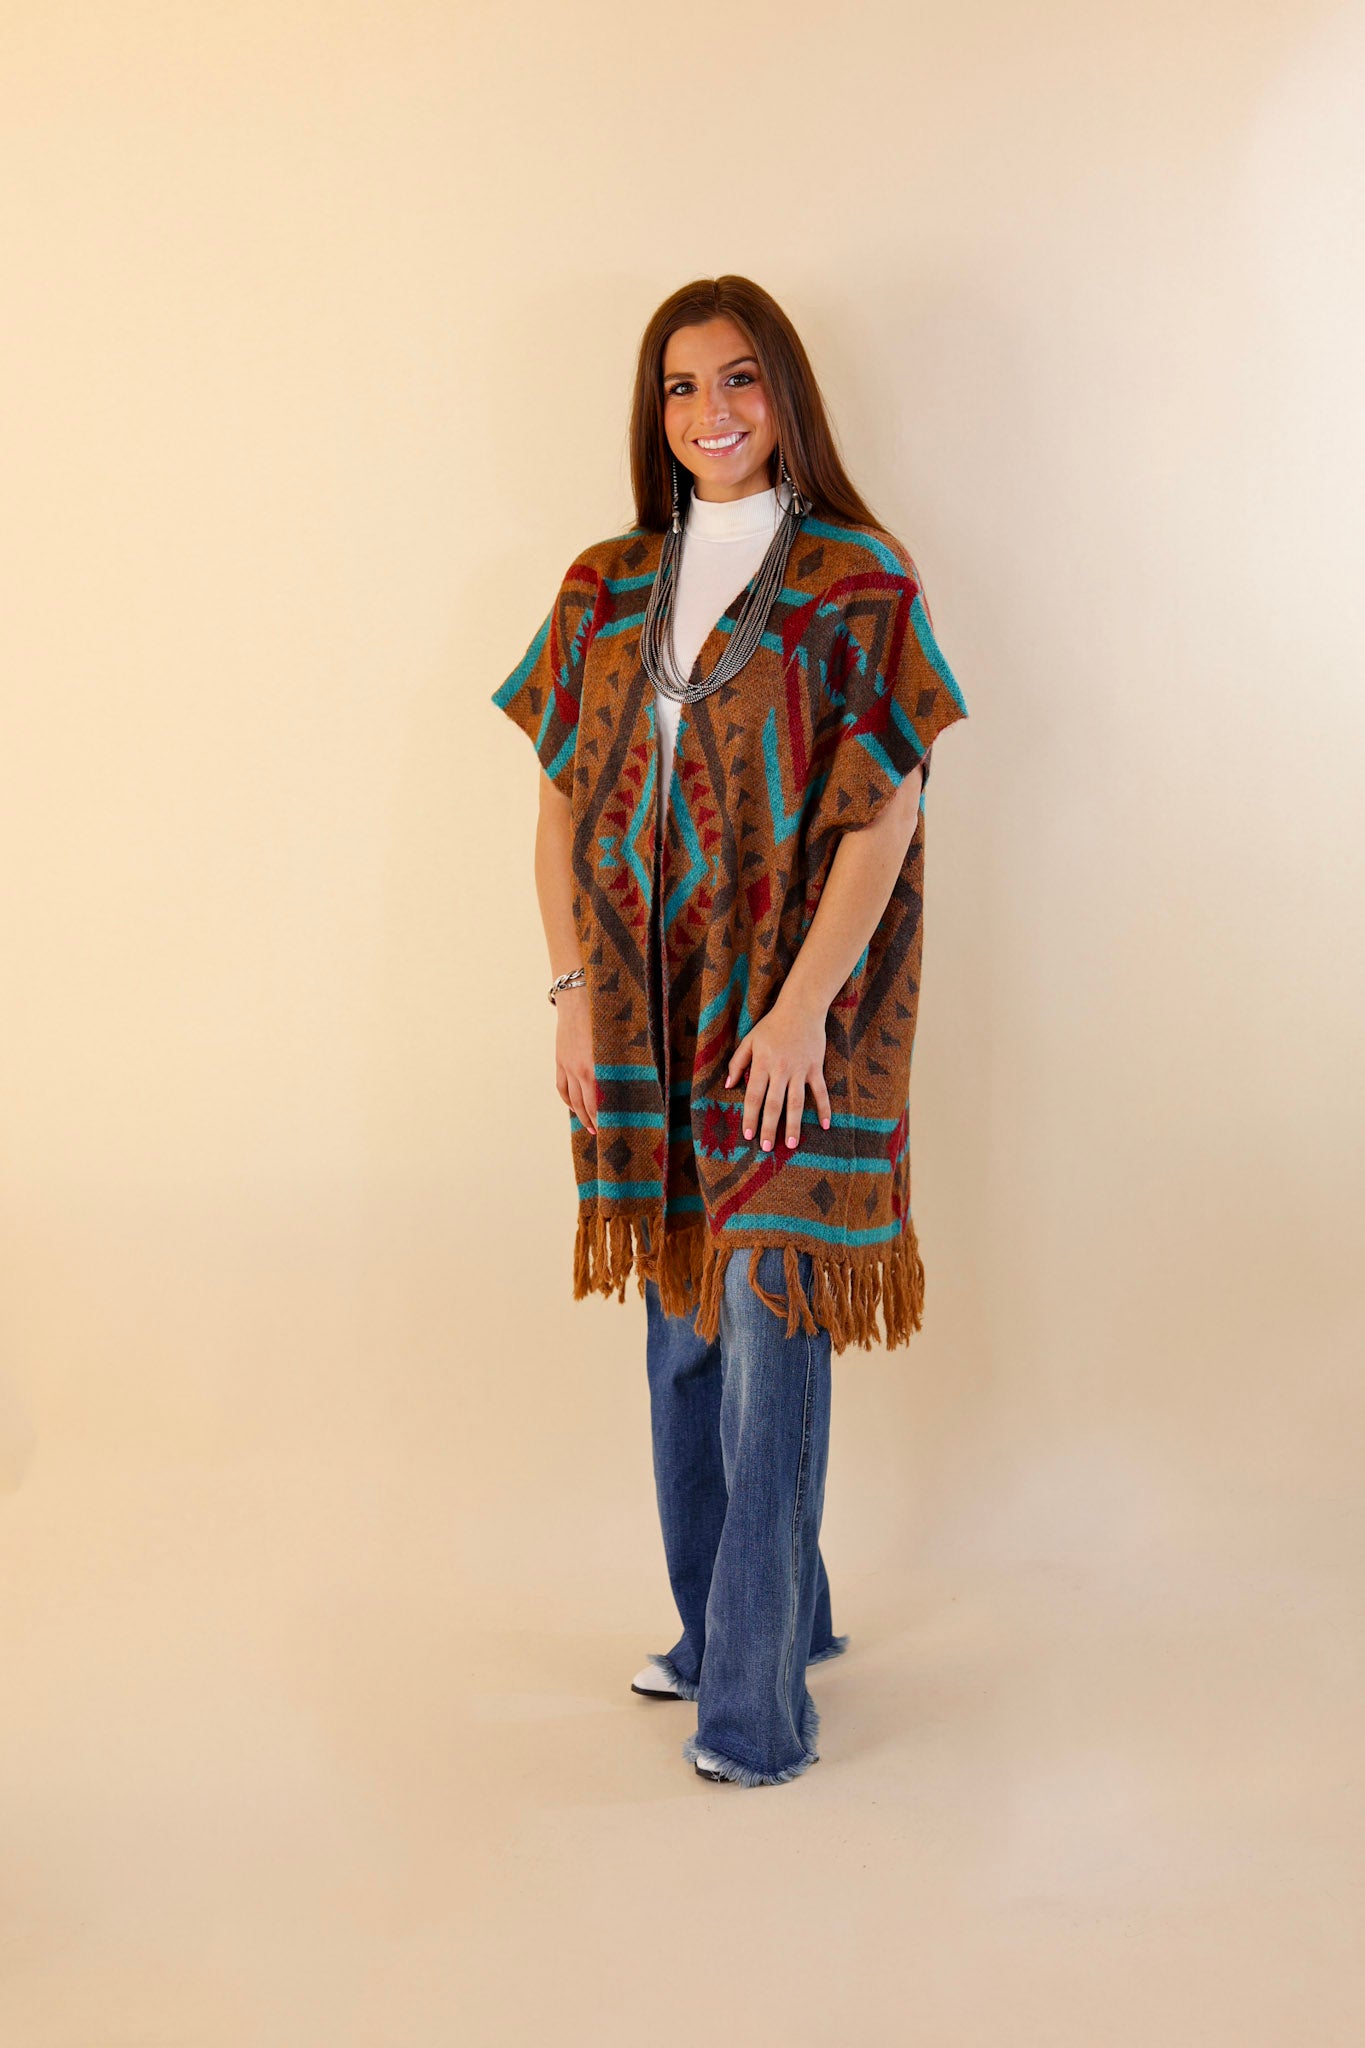 South Texas Sunset Aztec Print Wrap Poncho Vest in Turquoise and Camel - Giddy Up Glamour Boutique